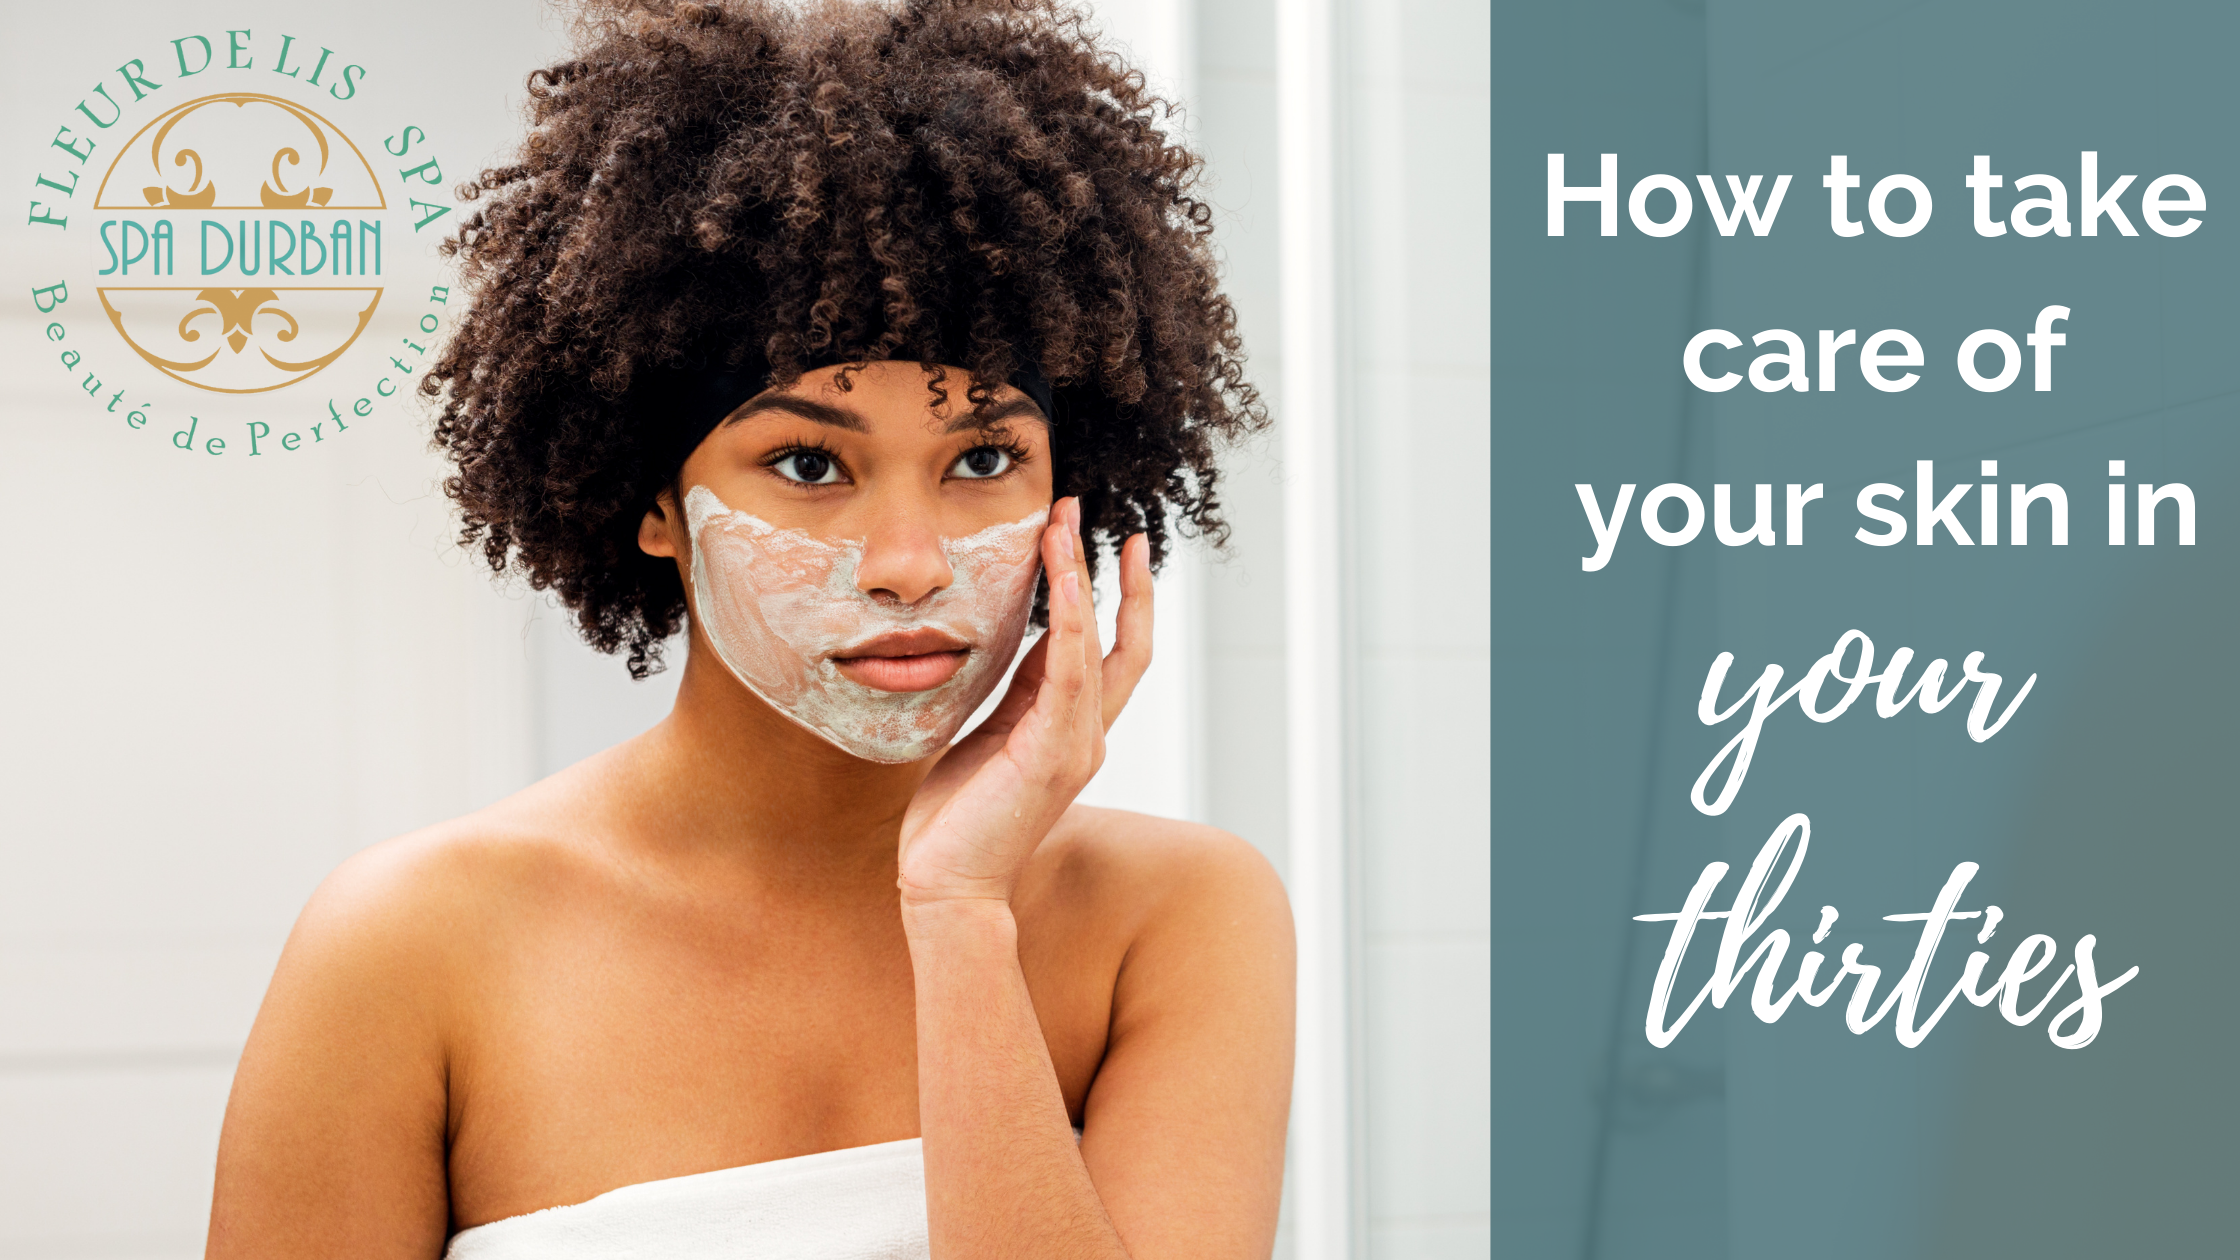 How to Take Care of Your Skin in Your Thirties